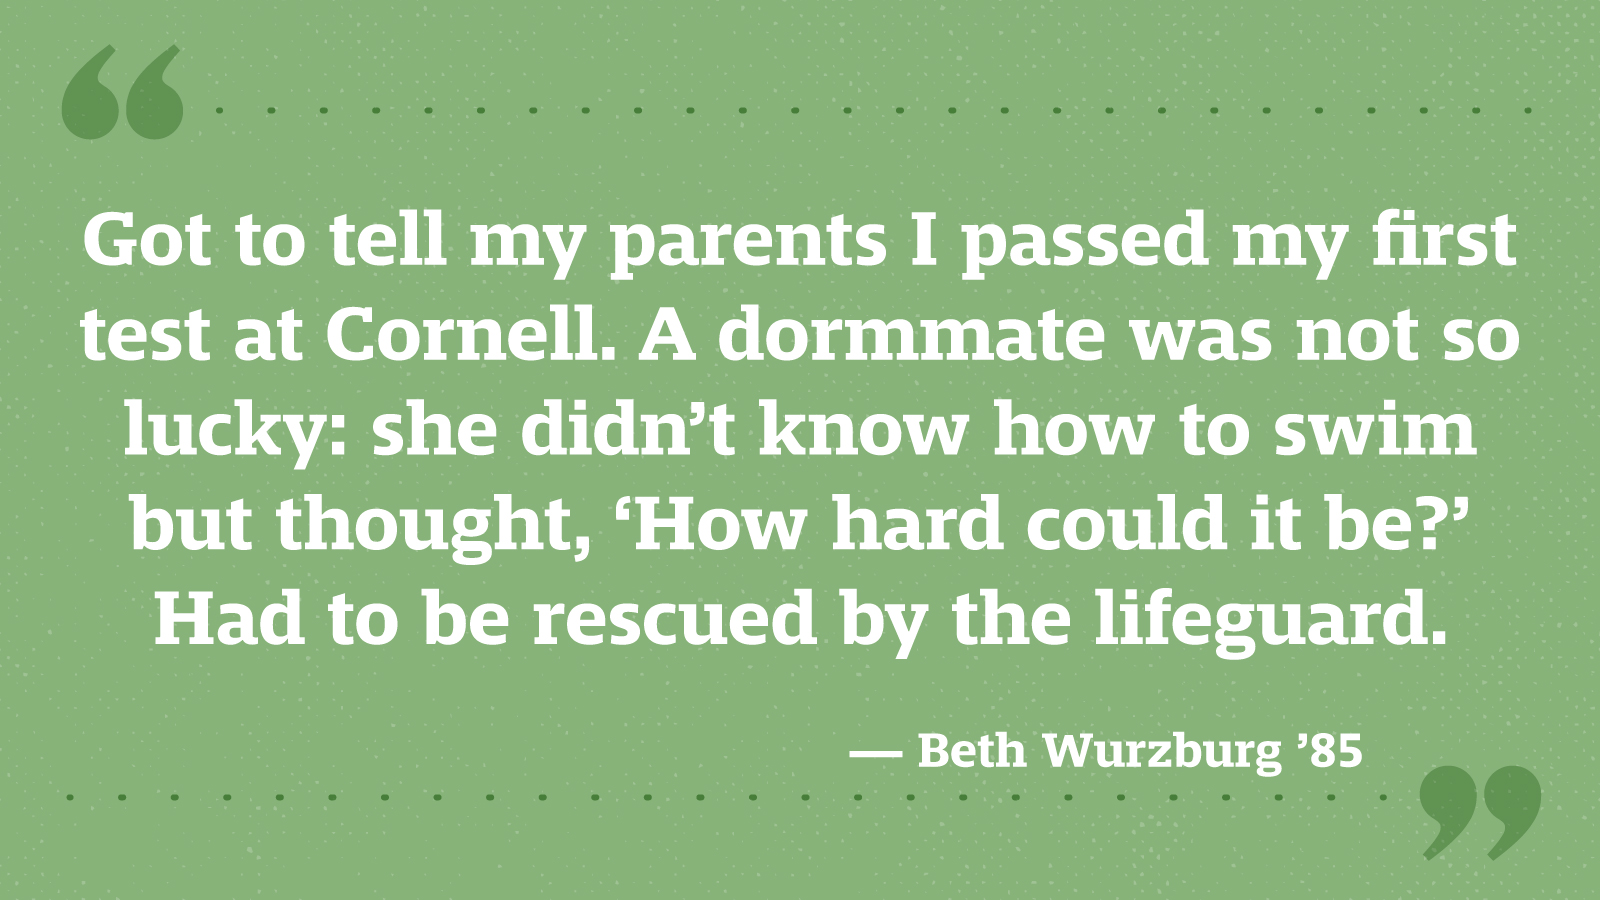 Got to tell my parents I passed my first test at Cornell. A dormmate was not so lucky: she didn’t know how to swim but thought, ‘How hard could it be?’ Had to be rescued by the lifeguard. — Beth Wurzburg ’85